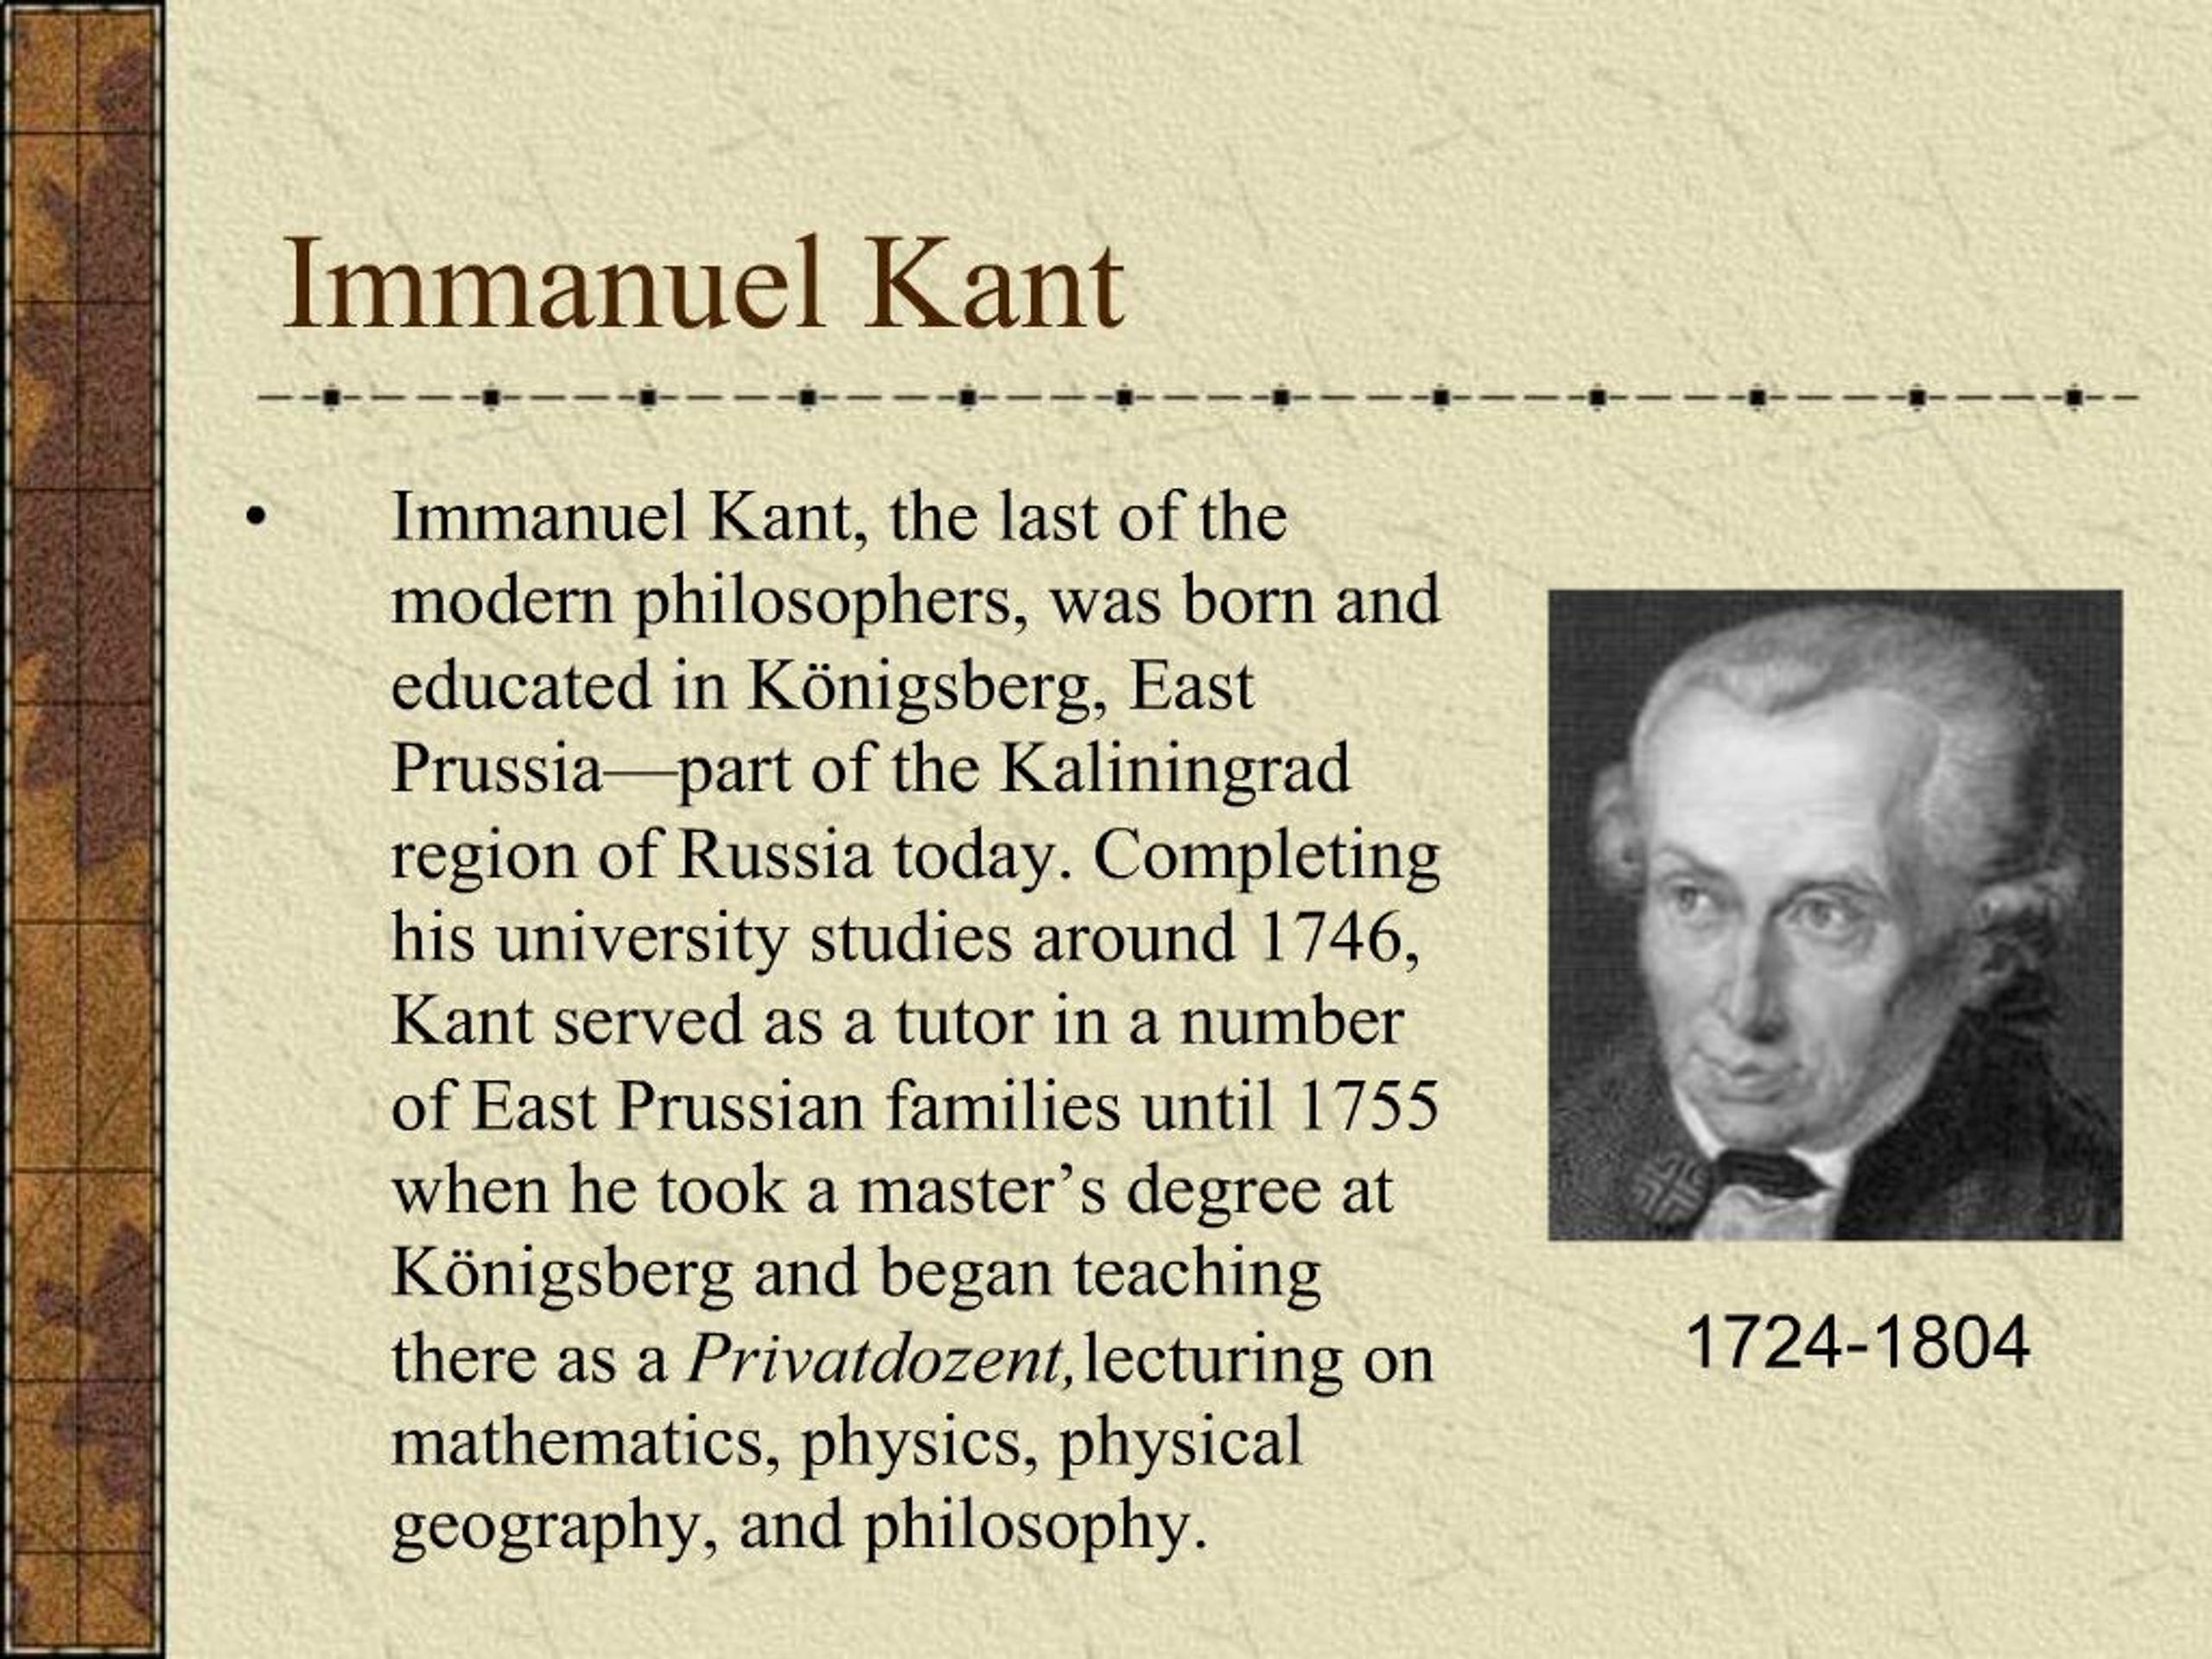 PPT - Immanuel Kant PowerPoint Presentation, free download - ID:579523